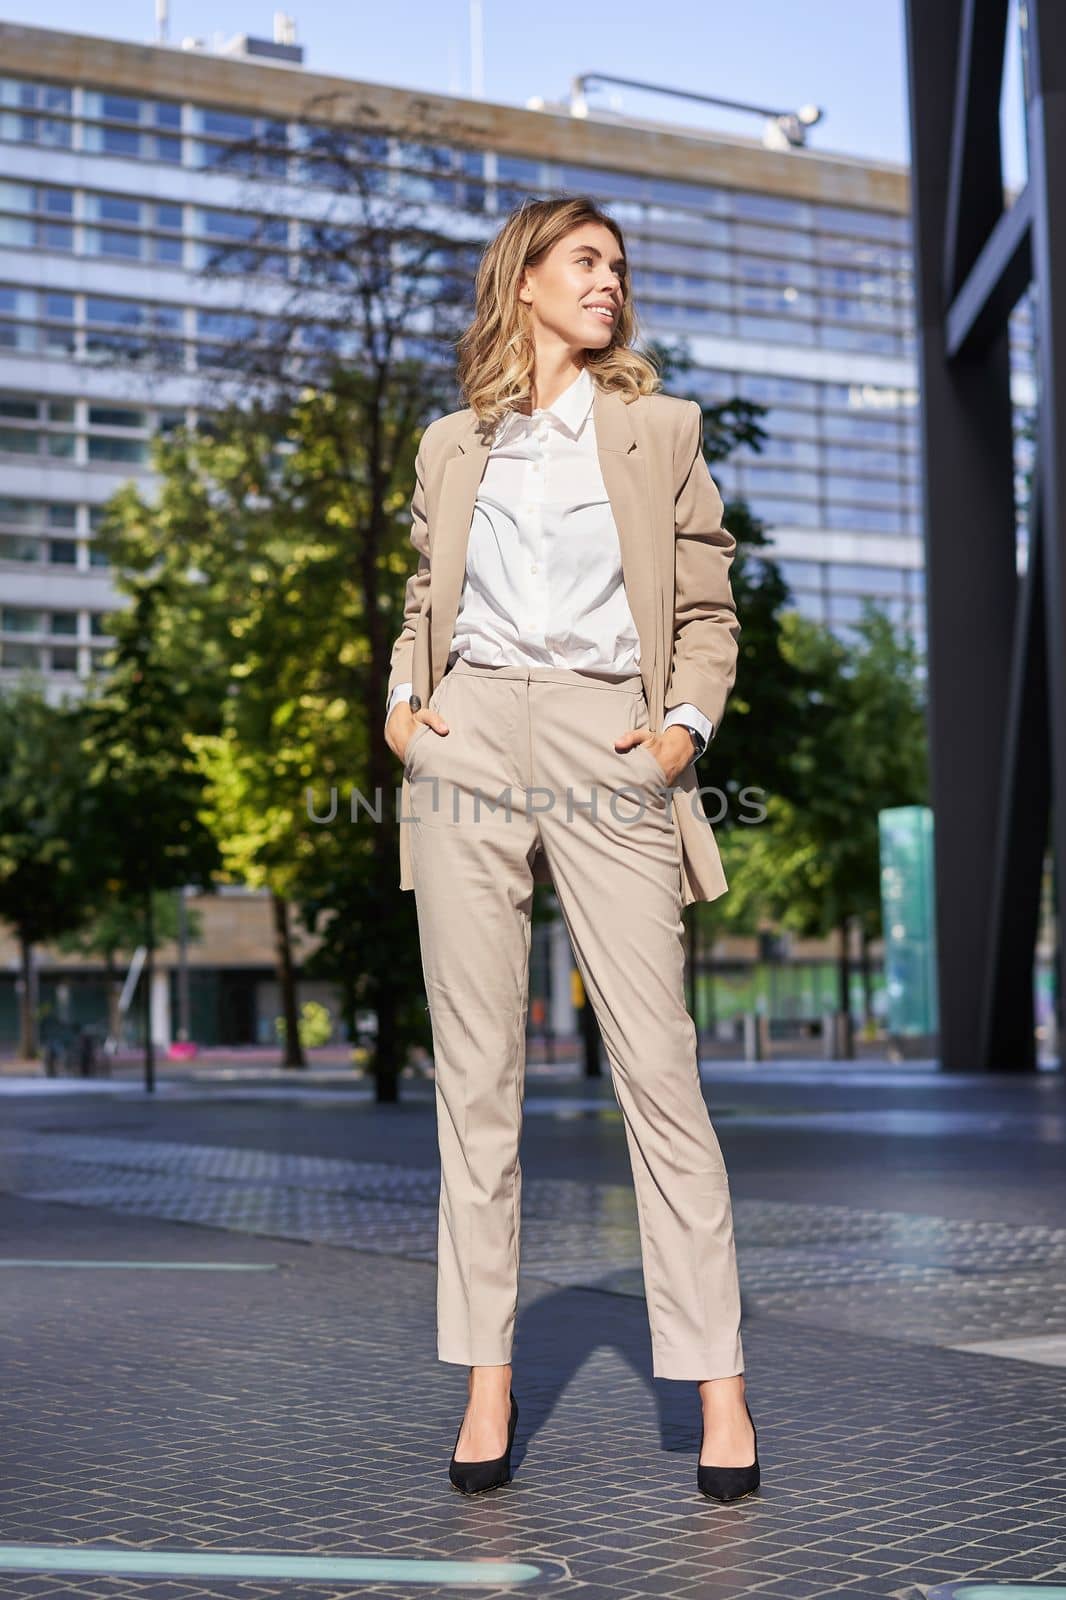 Vertical portrait of young confident businesswoman in high heels and beige suit, looking aside, smiling, holding hands in pockets.